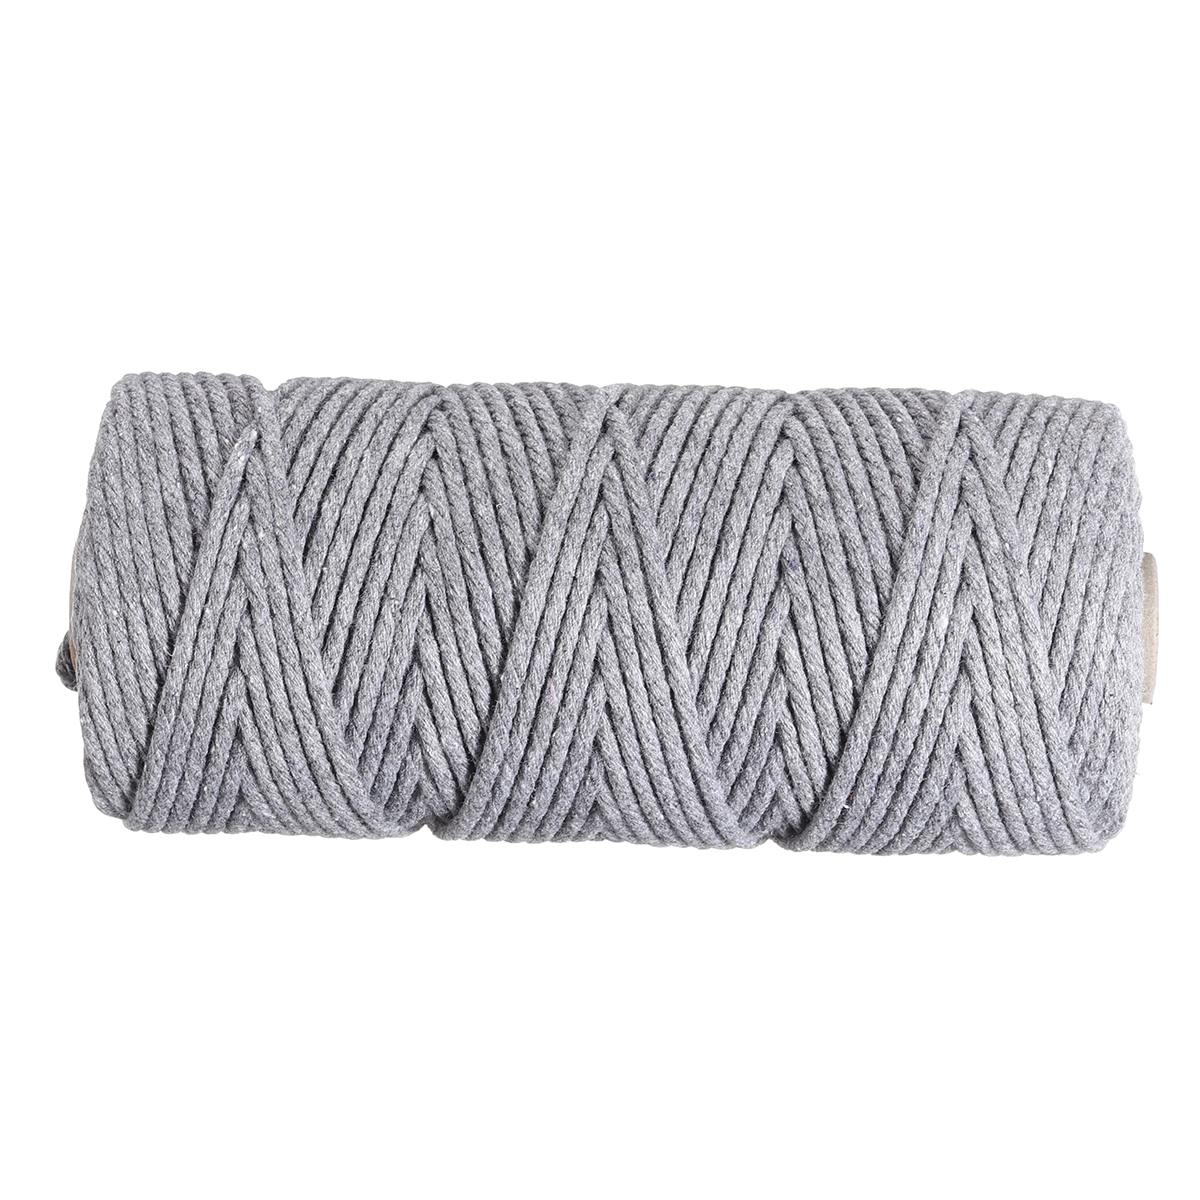 3MM-100MRoll-Cotton-Rope-Thread-Cords-String-Macrame-DIY-Craft-Wire-4-Strands-1709362-8